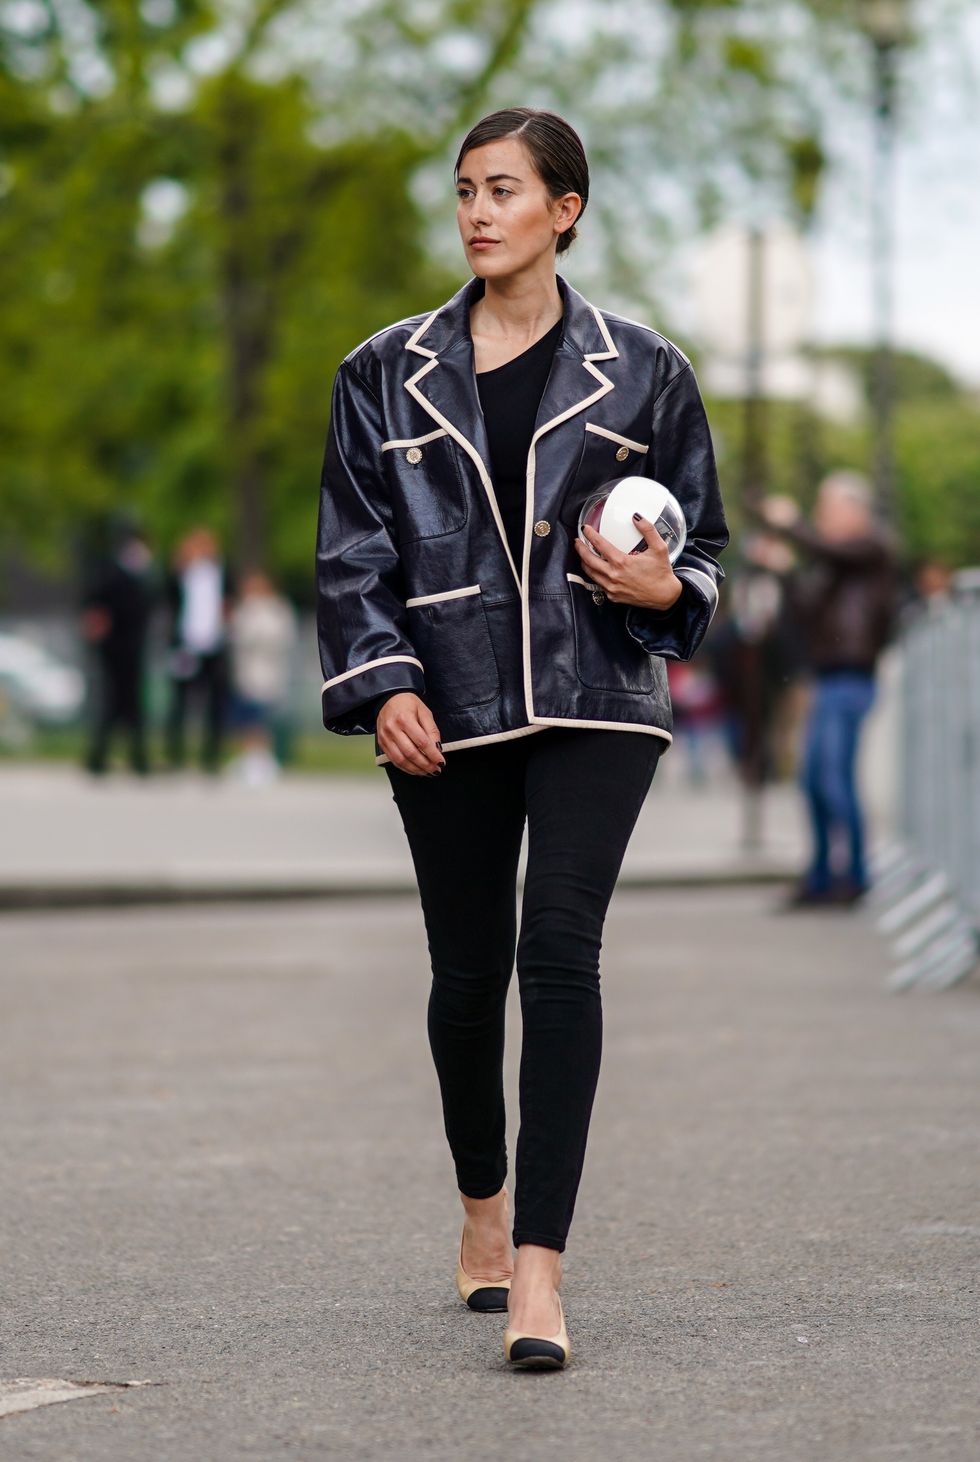 Fashion and style: Black leather